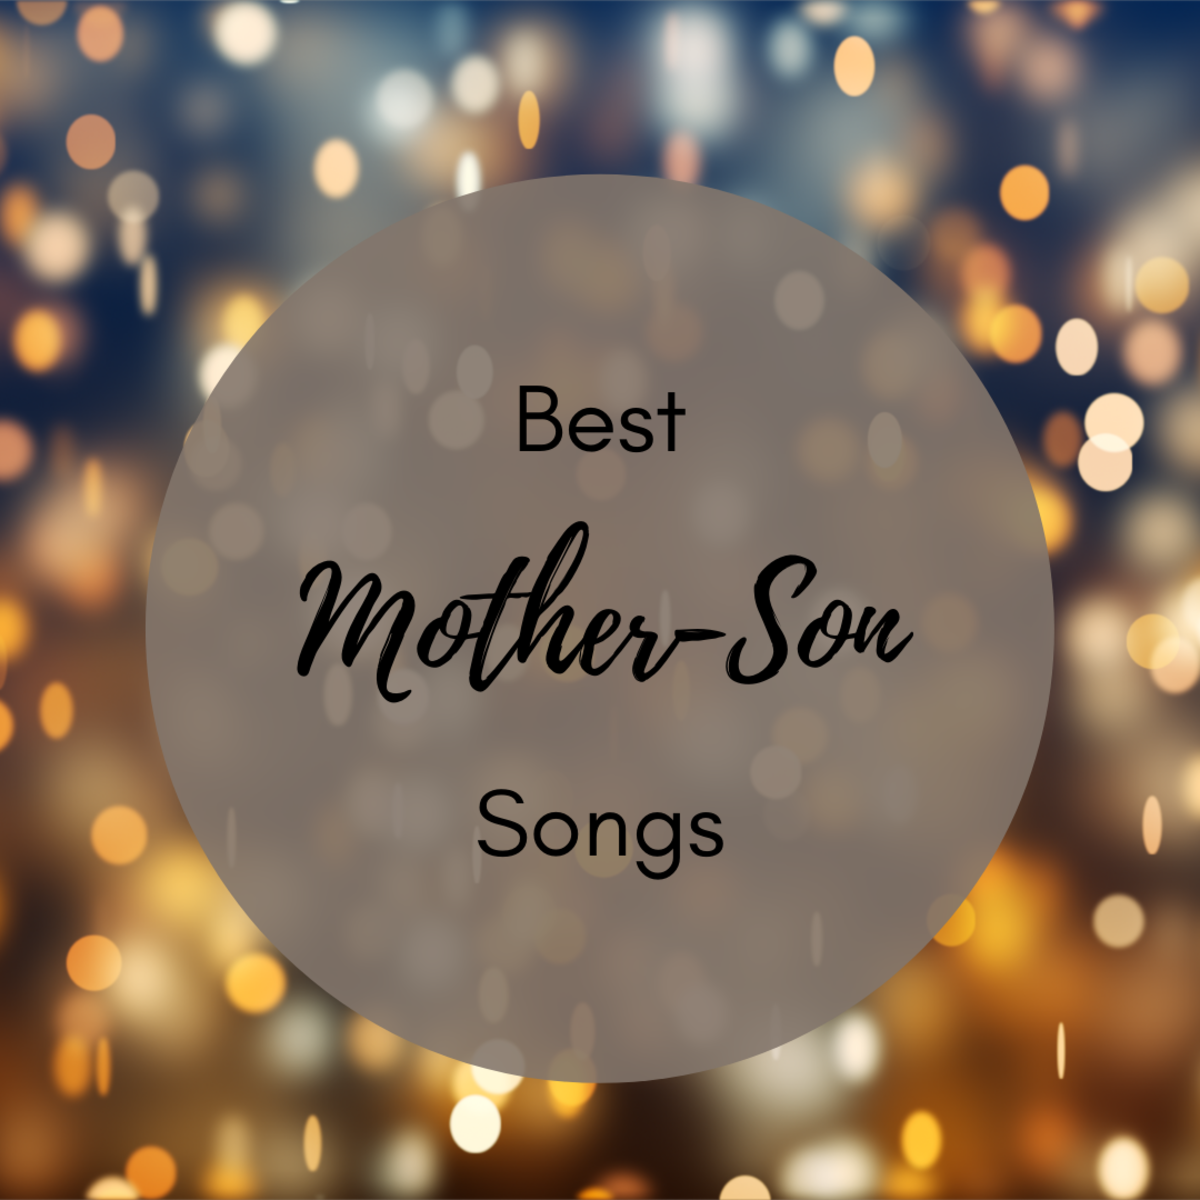 Best mother-son songs for weddings, dances, birthdays, and other celebrations